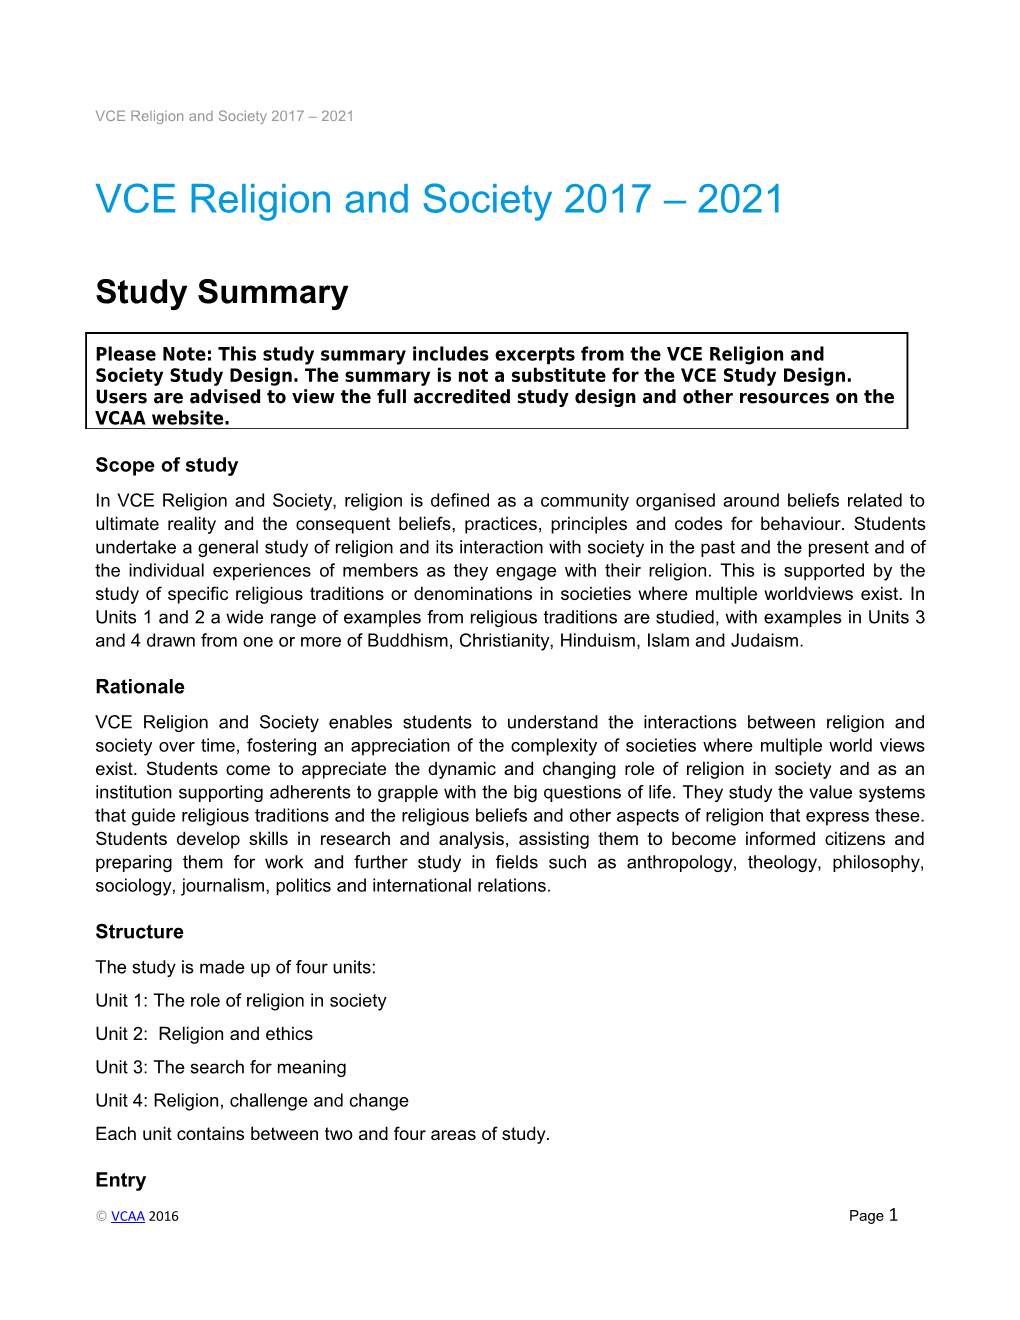 VCE Religion and Society 2017 2021